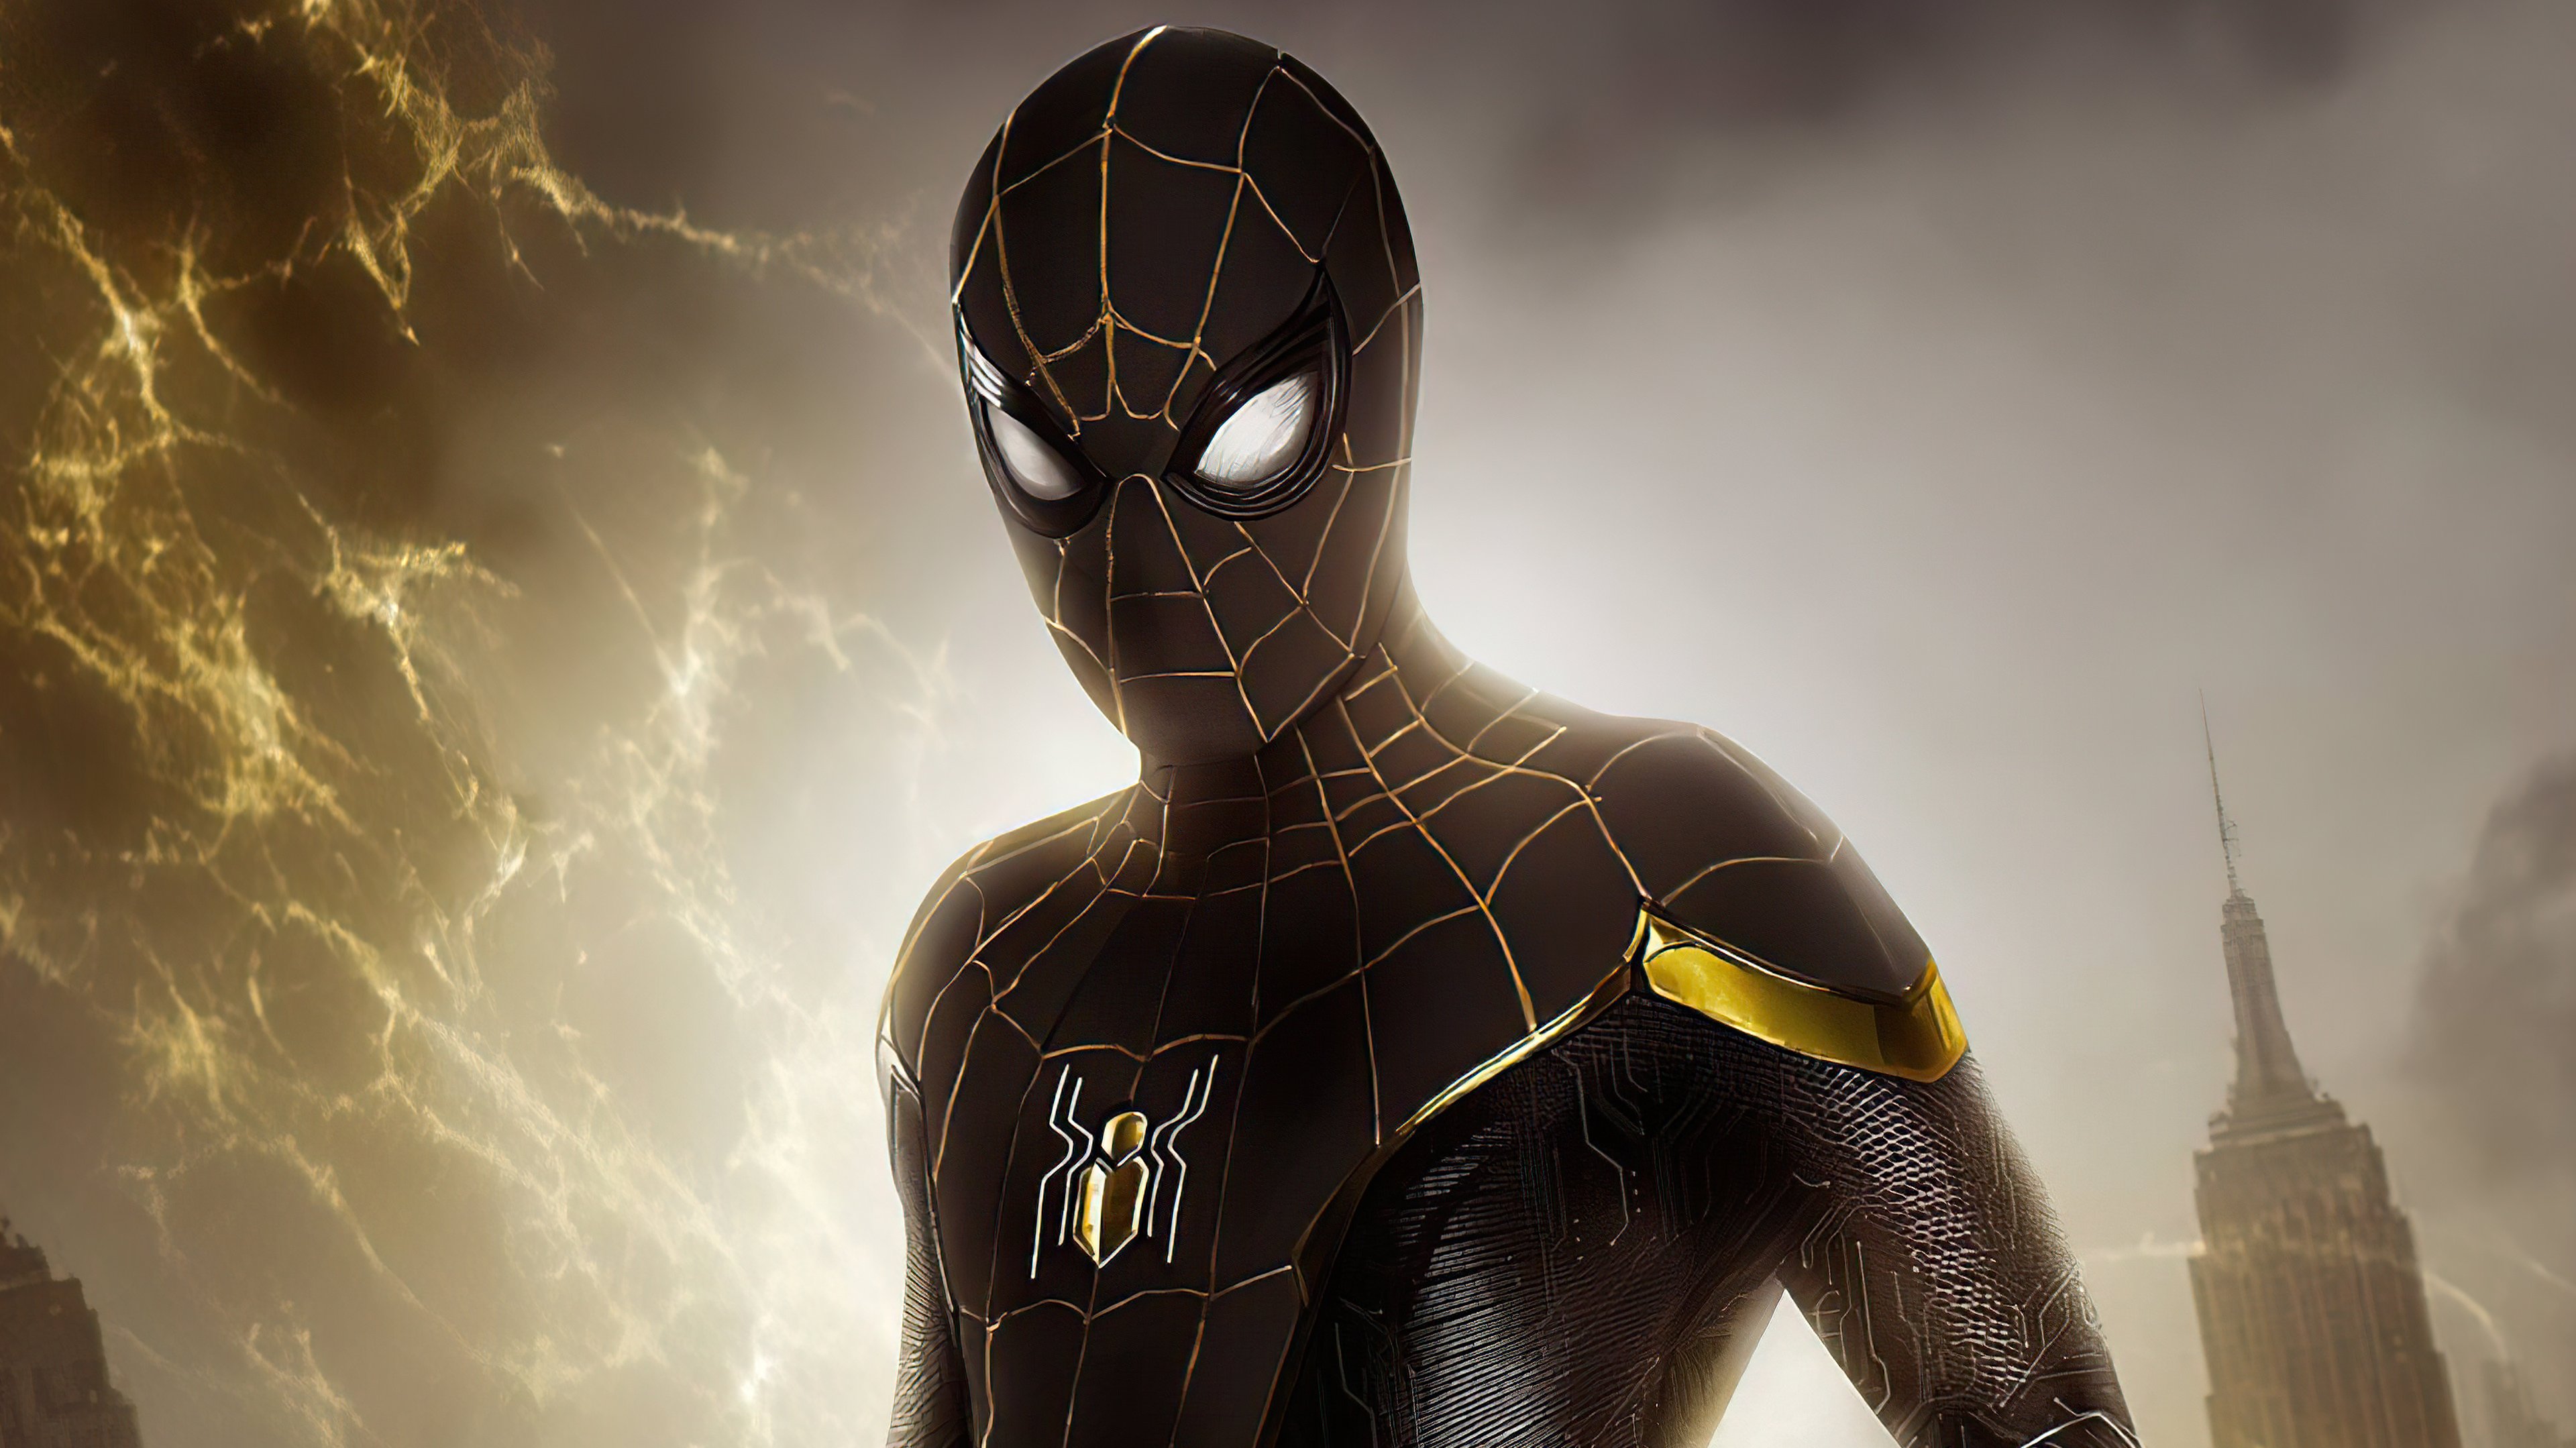 Spider Man black and gold suit Wallpaper 4k Ultra HD